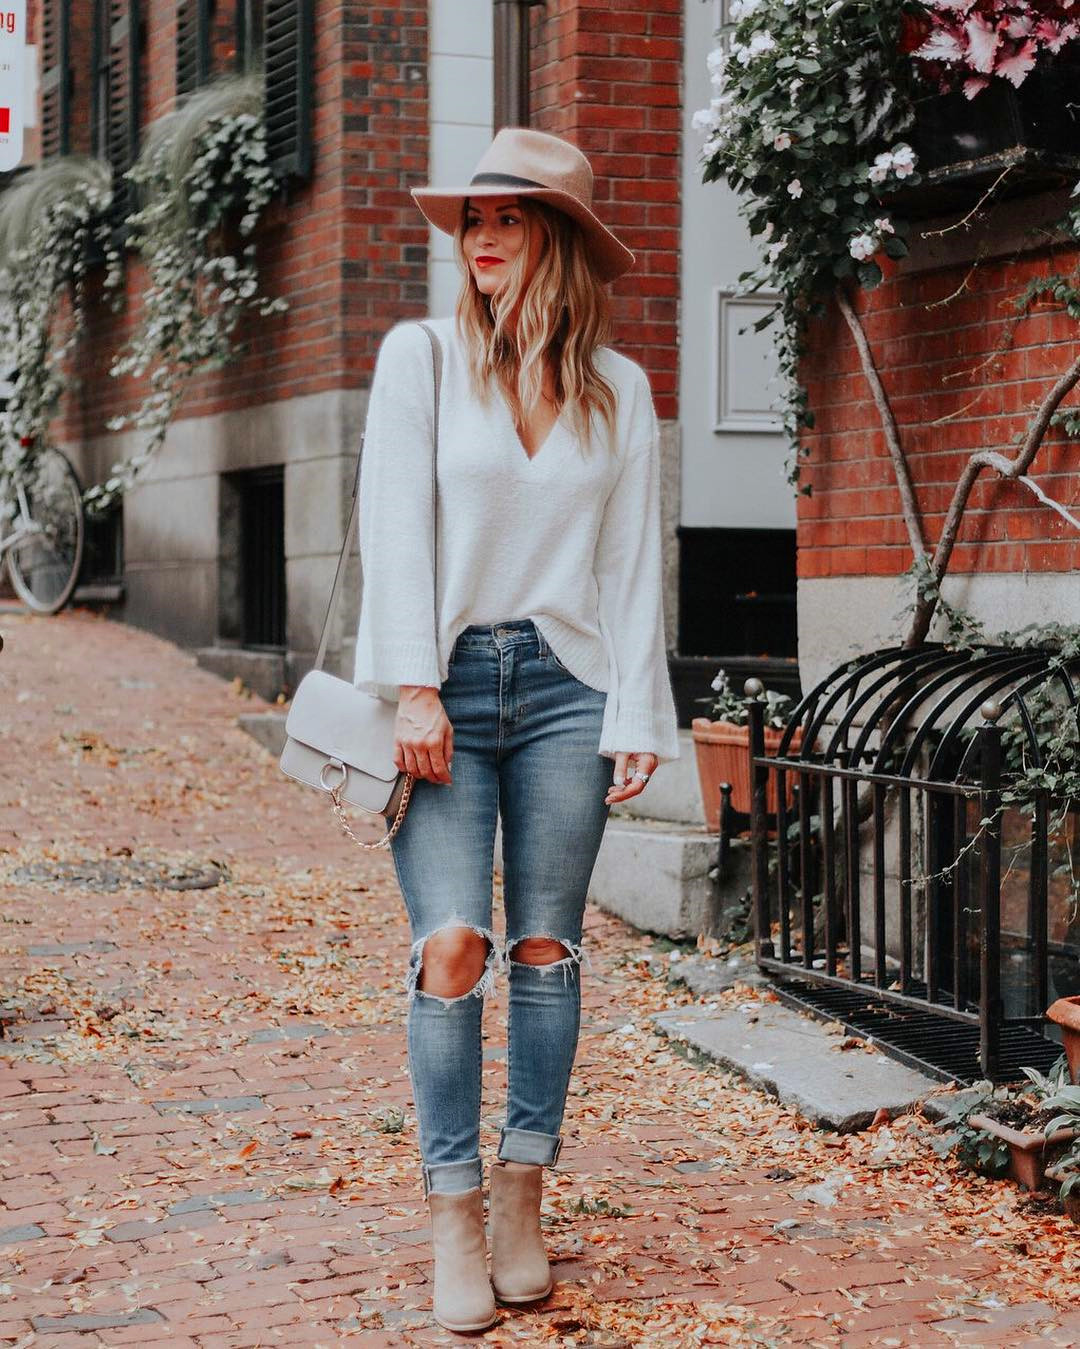 65 Best Fall Outfit Trends For Women